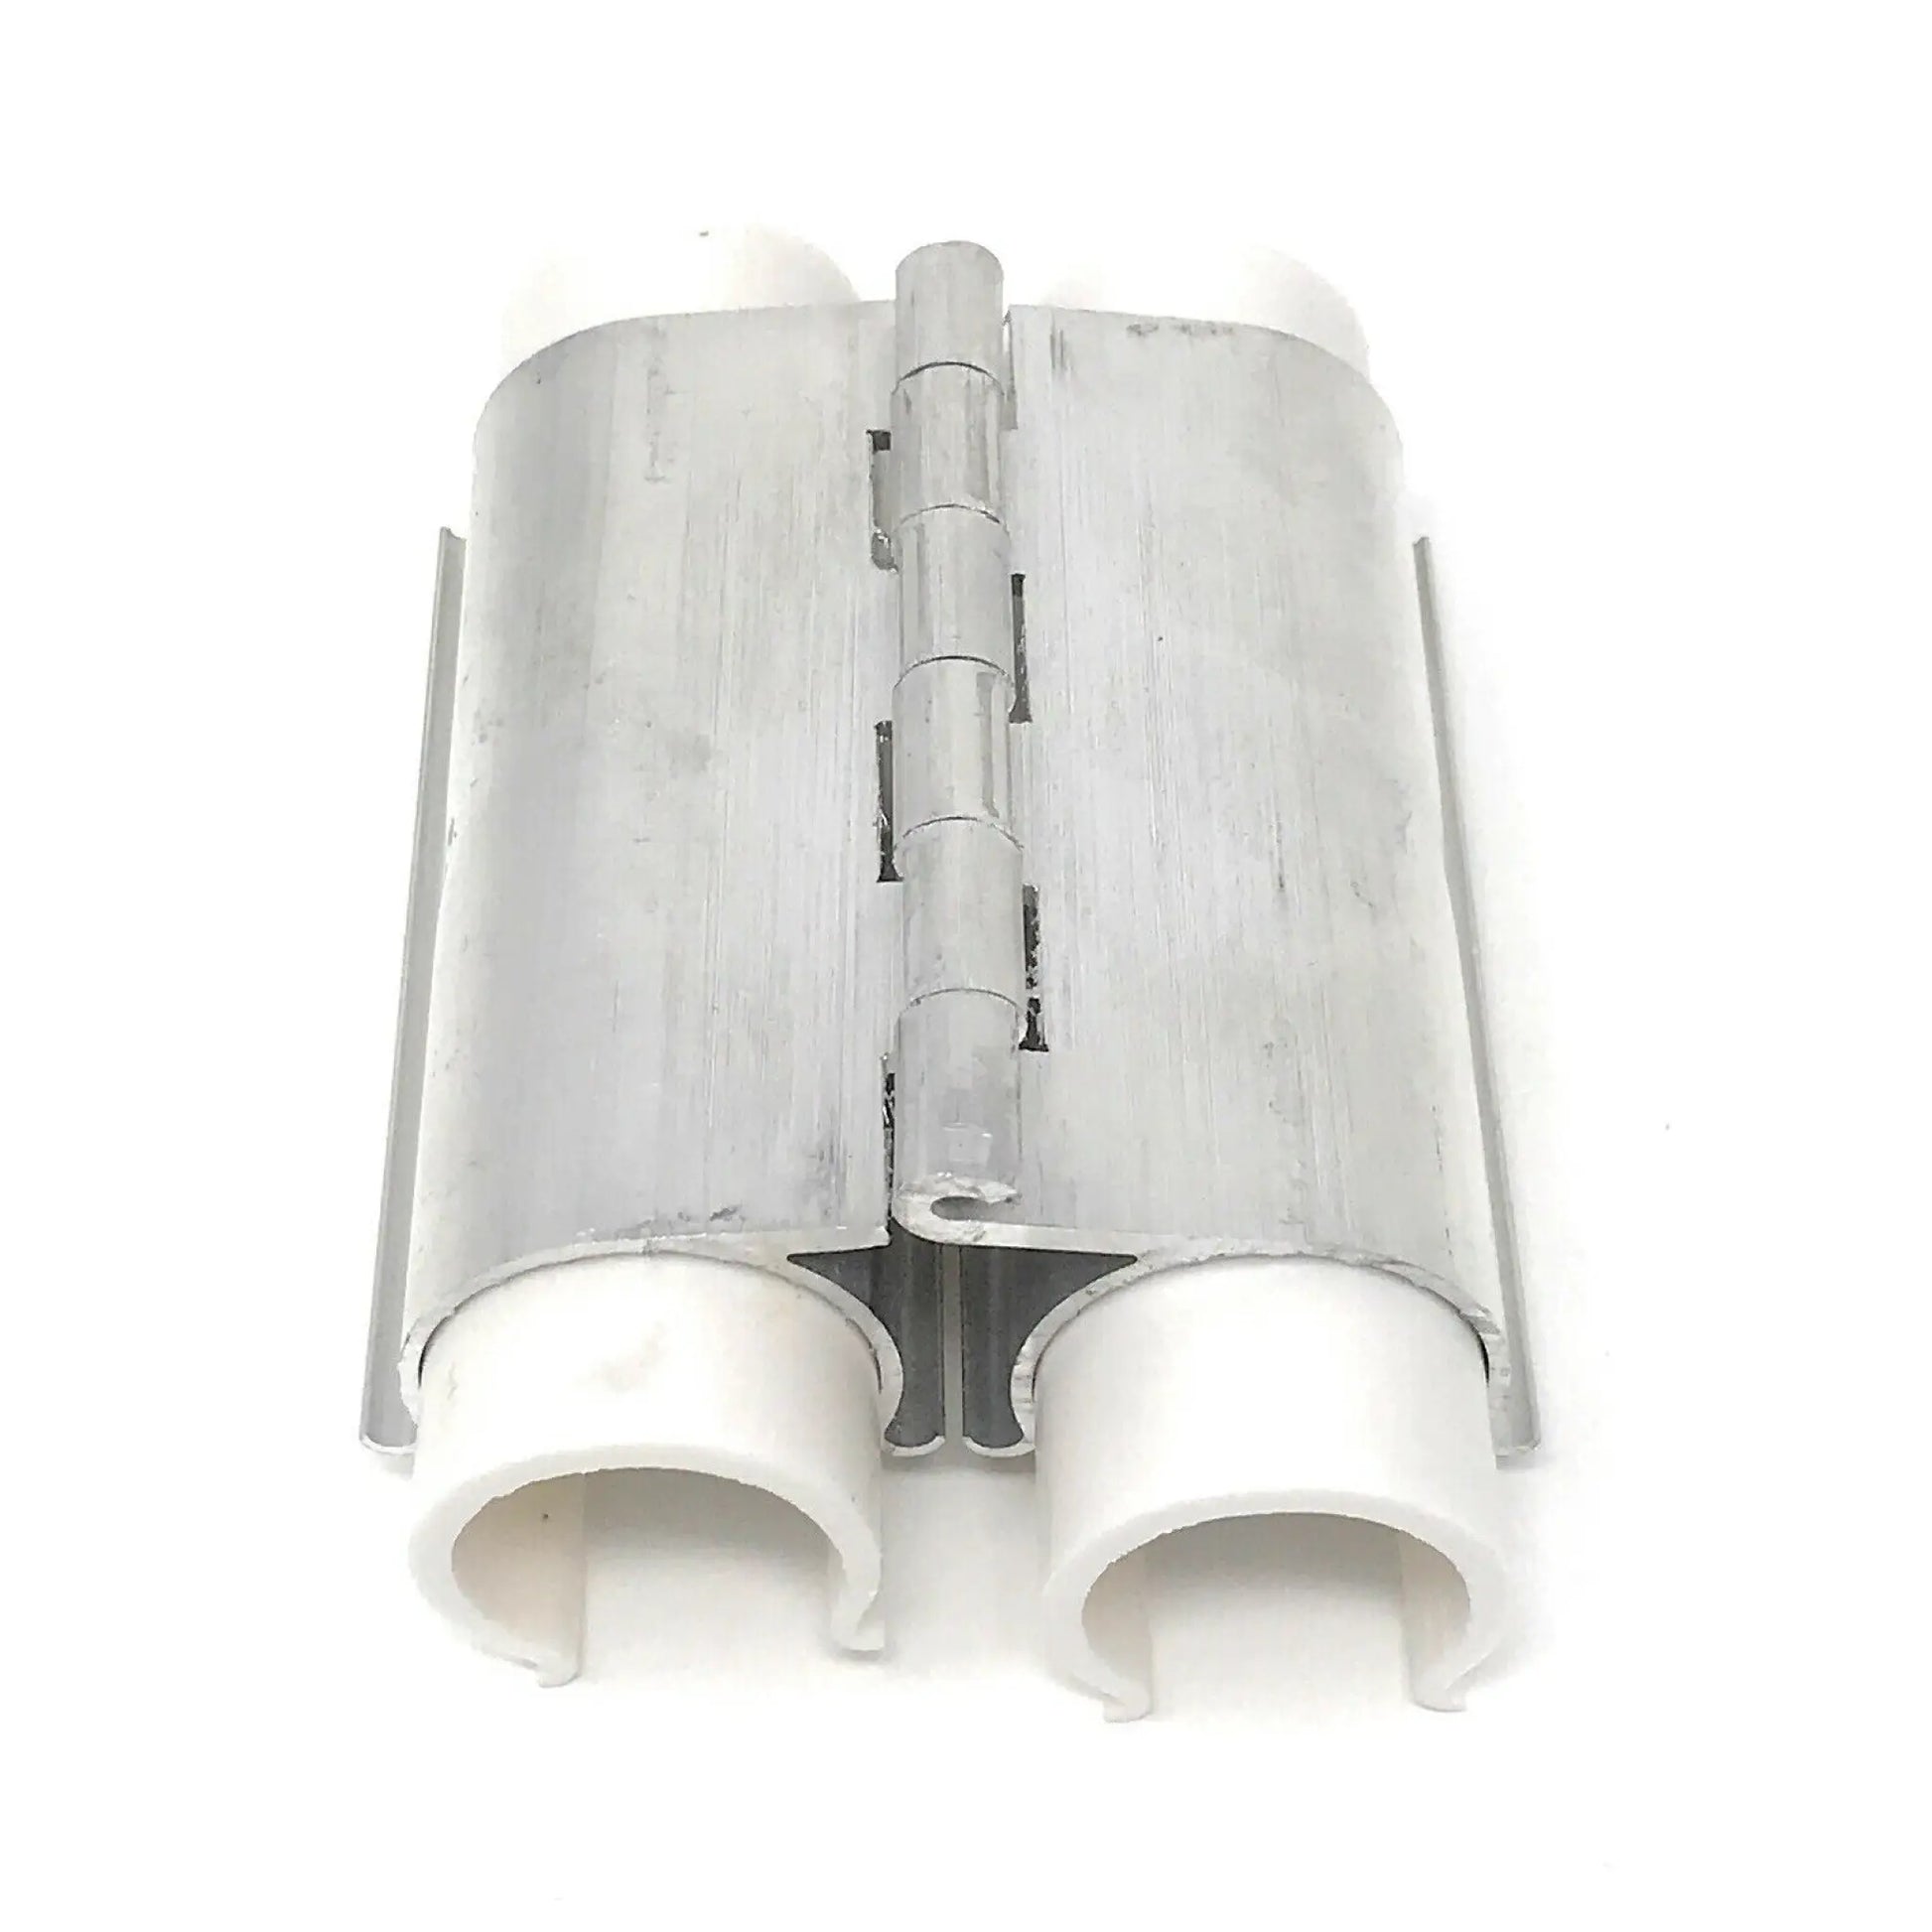 Aluminum Snap on Hinges for EMT pipes